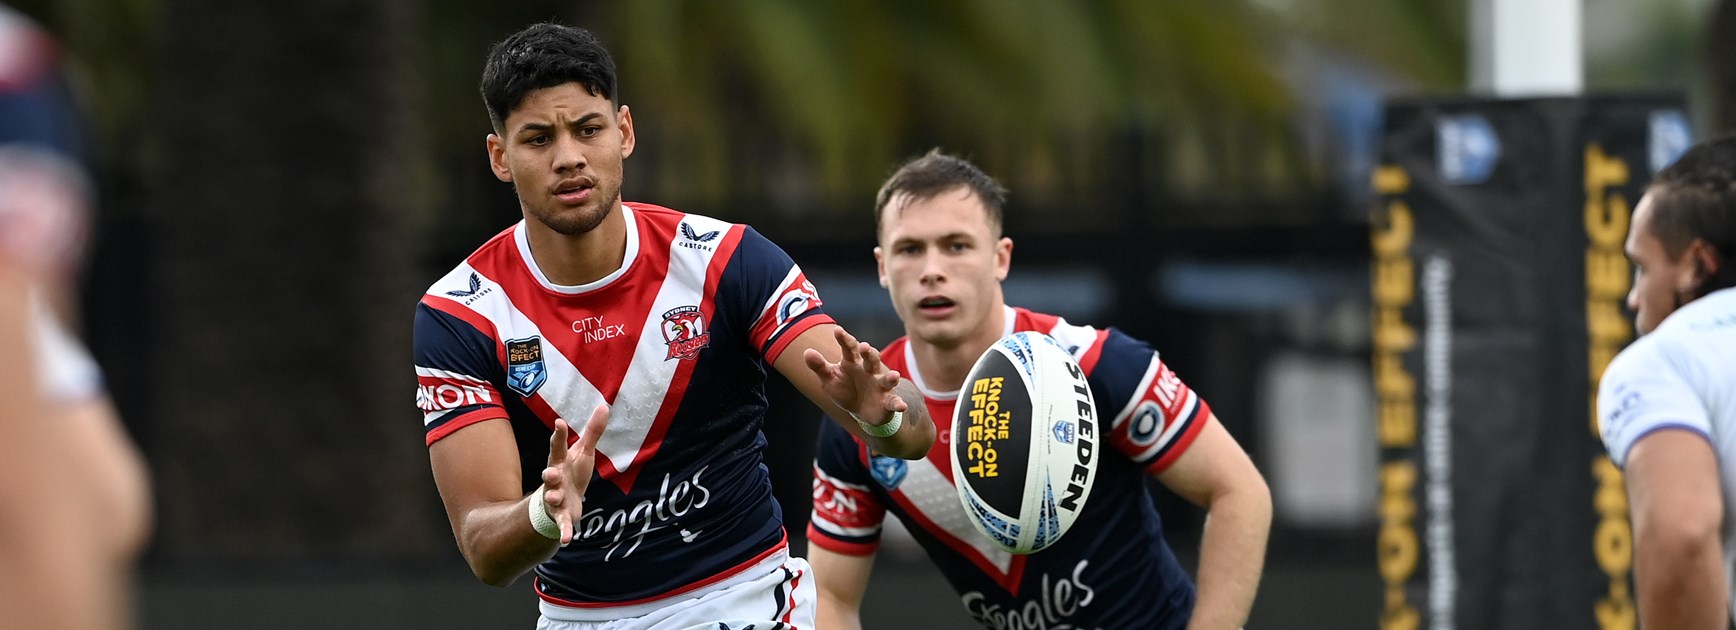 Easts Outclassed by Knights in High-Scoring Contest